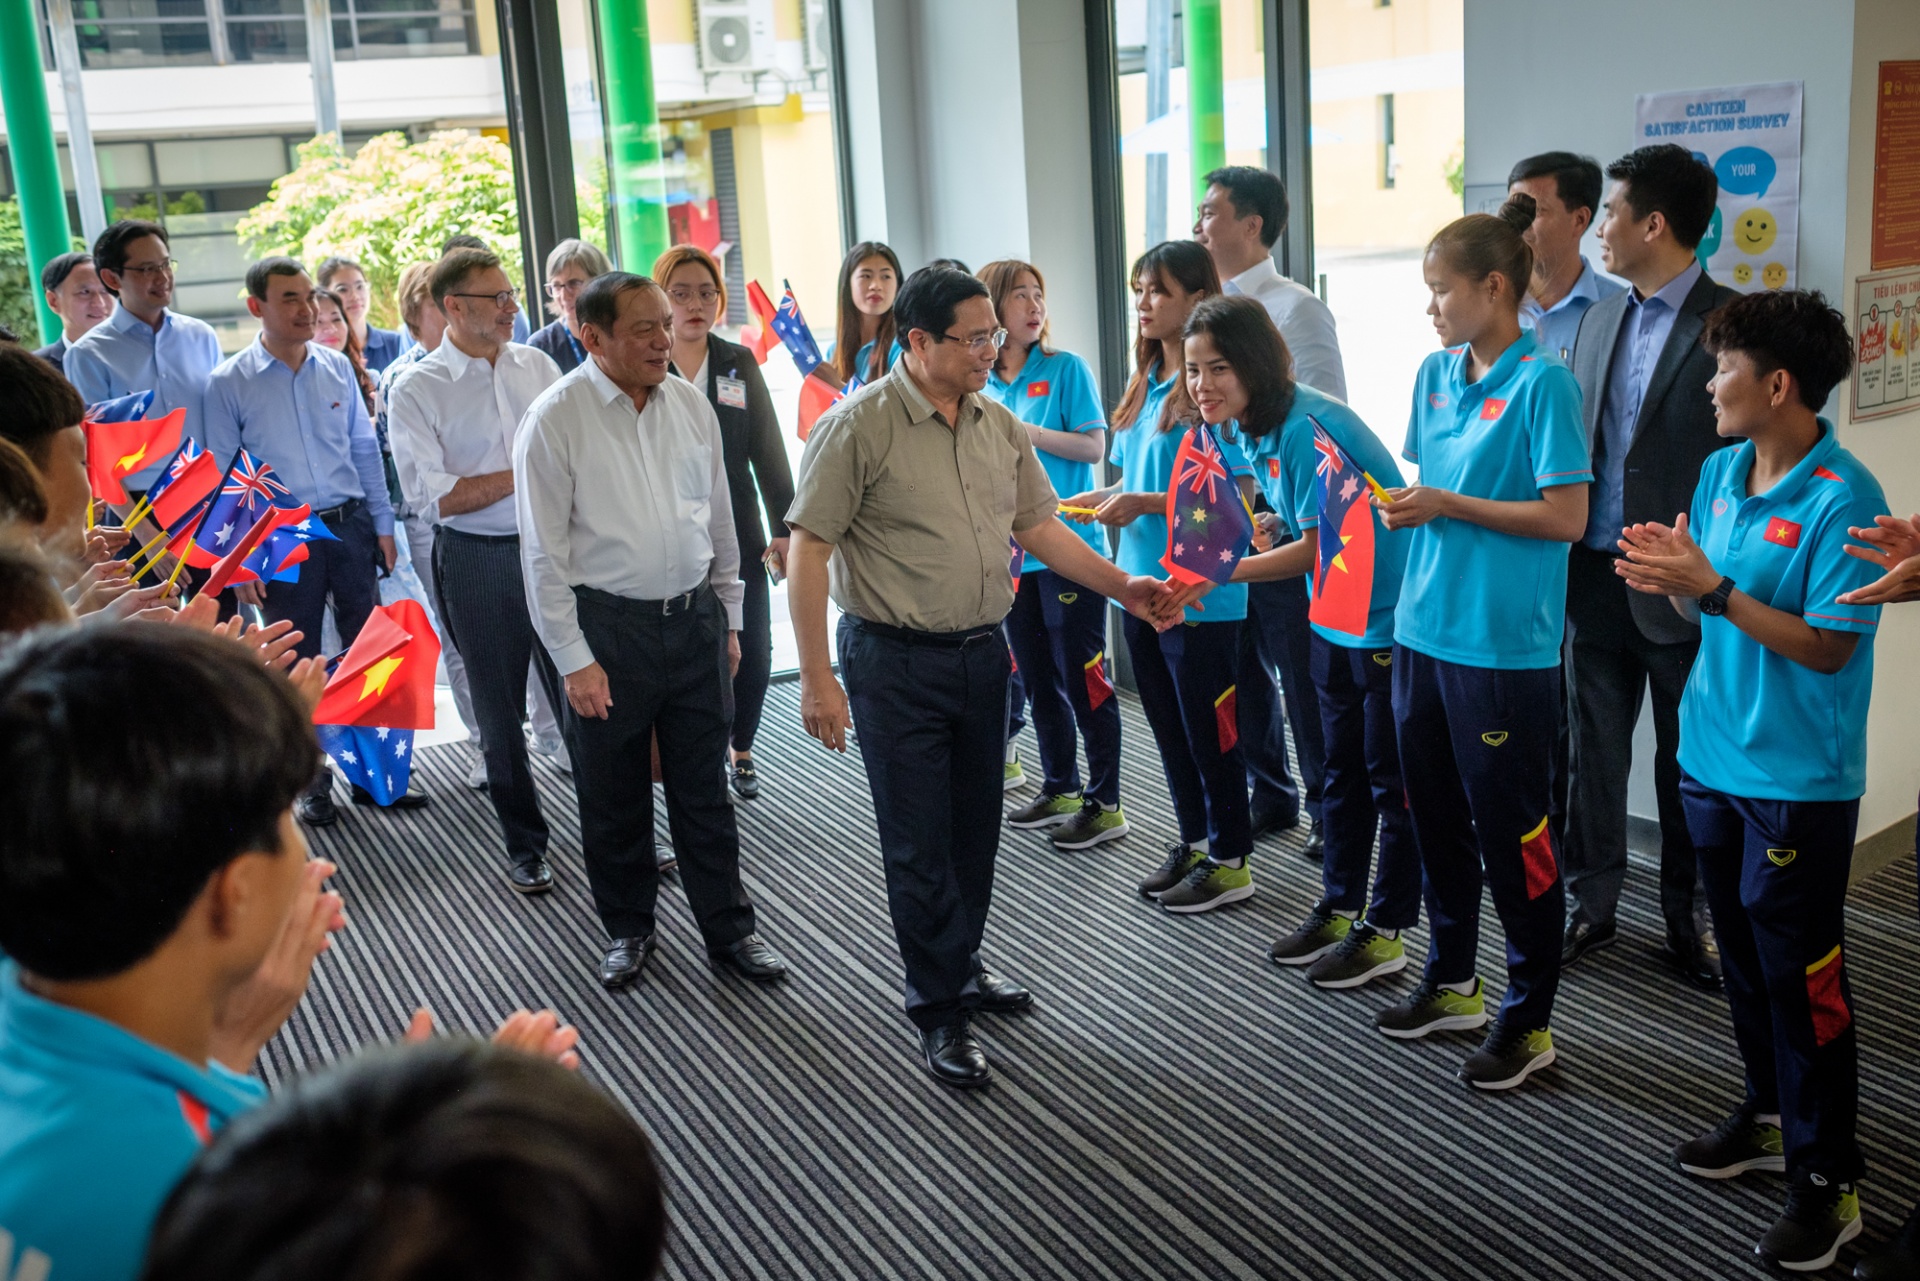 PMs of Australia and Vietnam promote the power of sport to change girls’ lives